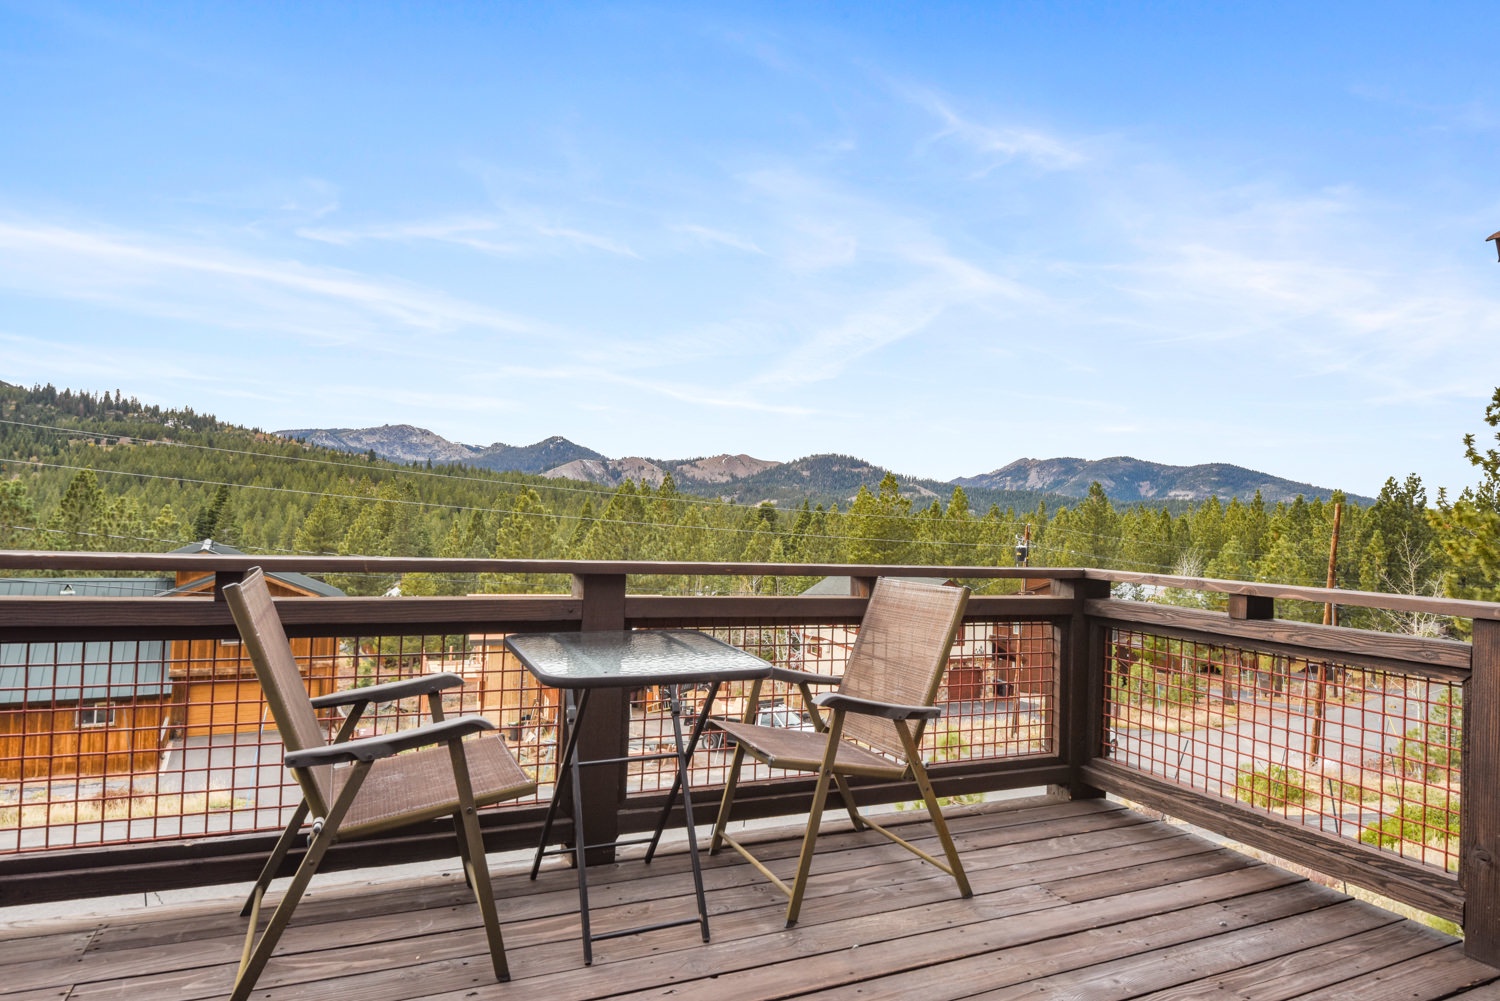 Breathe in the mountain air on your choice of 2 balconies